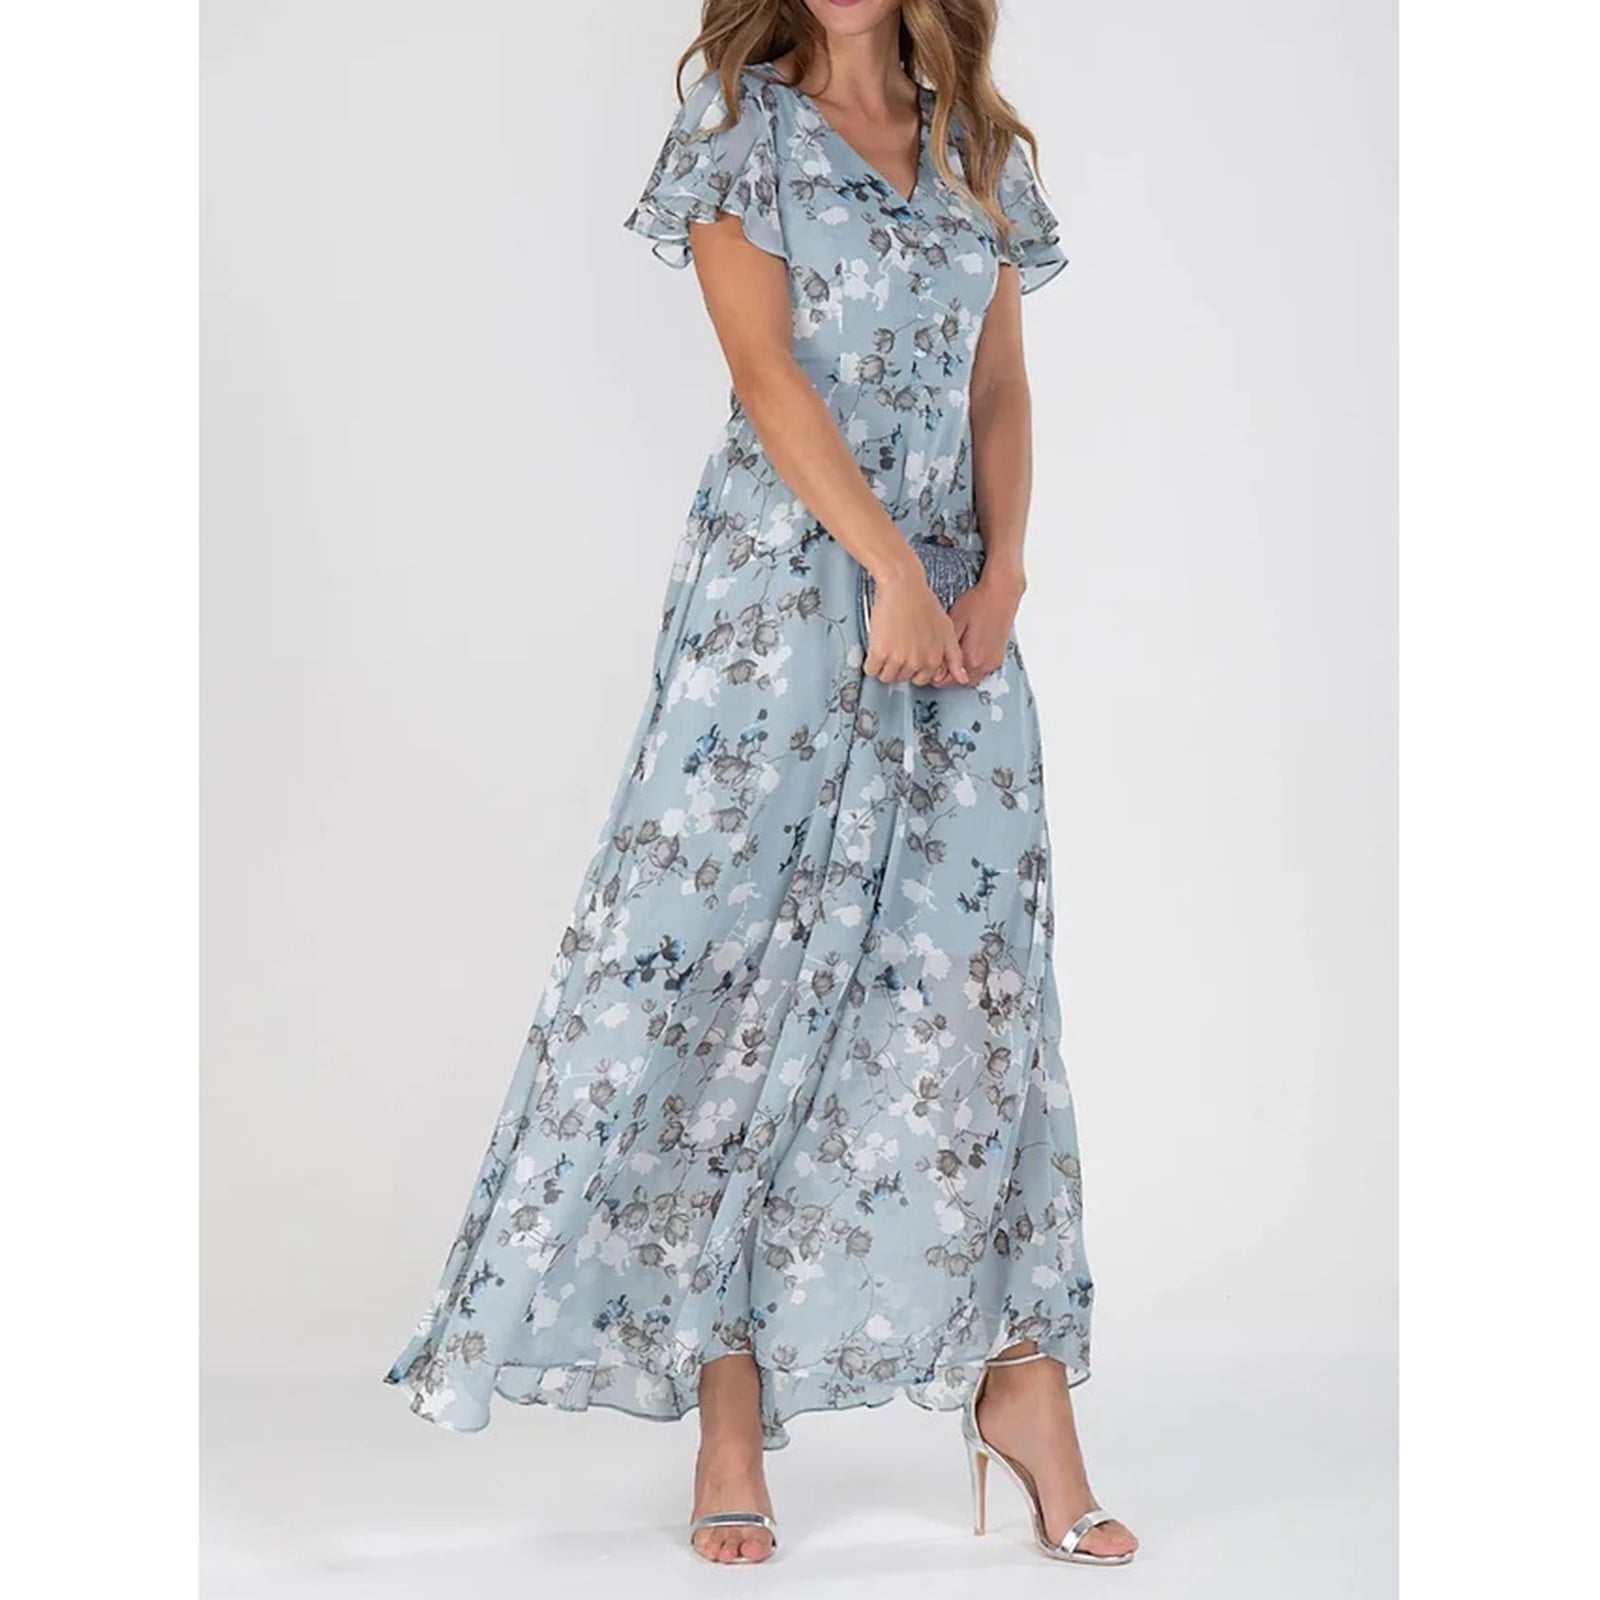 🥰🌟Office Wear Chiffon Gown Styles For Ladies